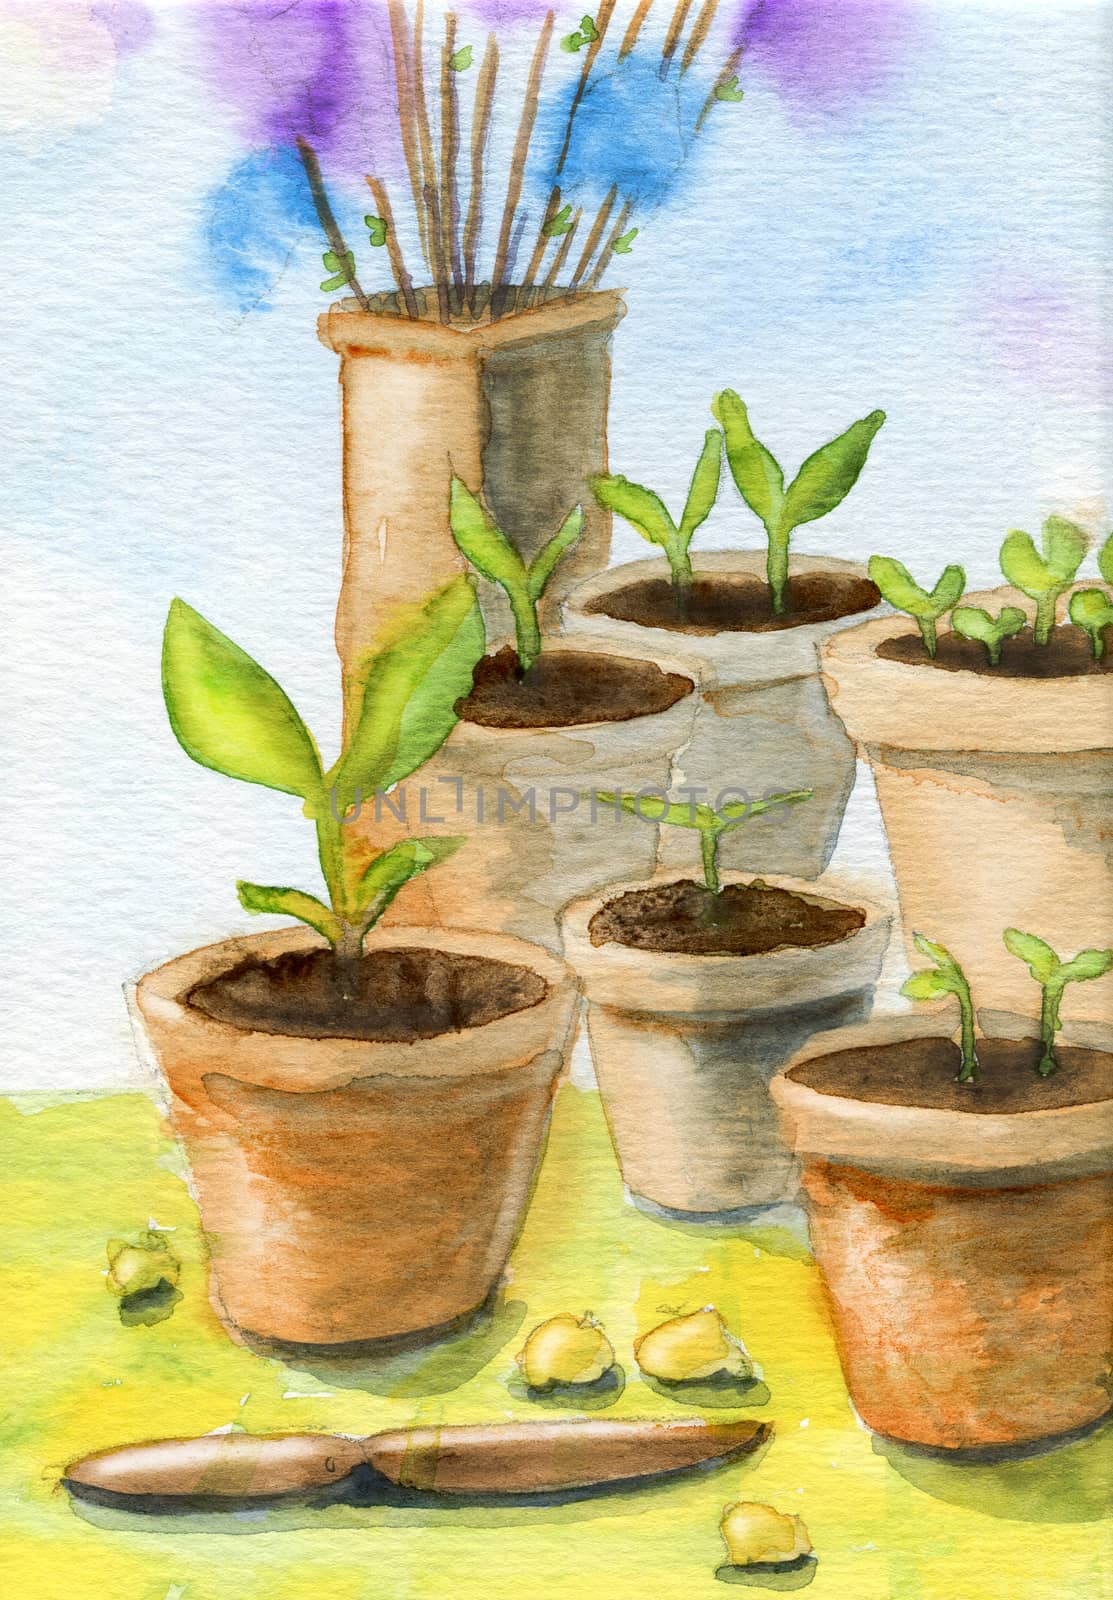 Garden pots, plants and easter feathers. Original gouache and watercolor painting. 